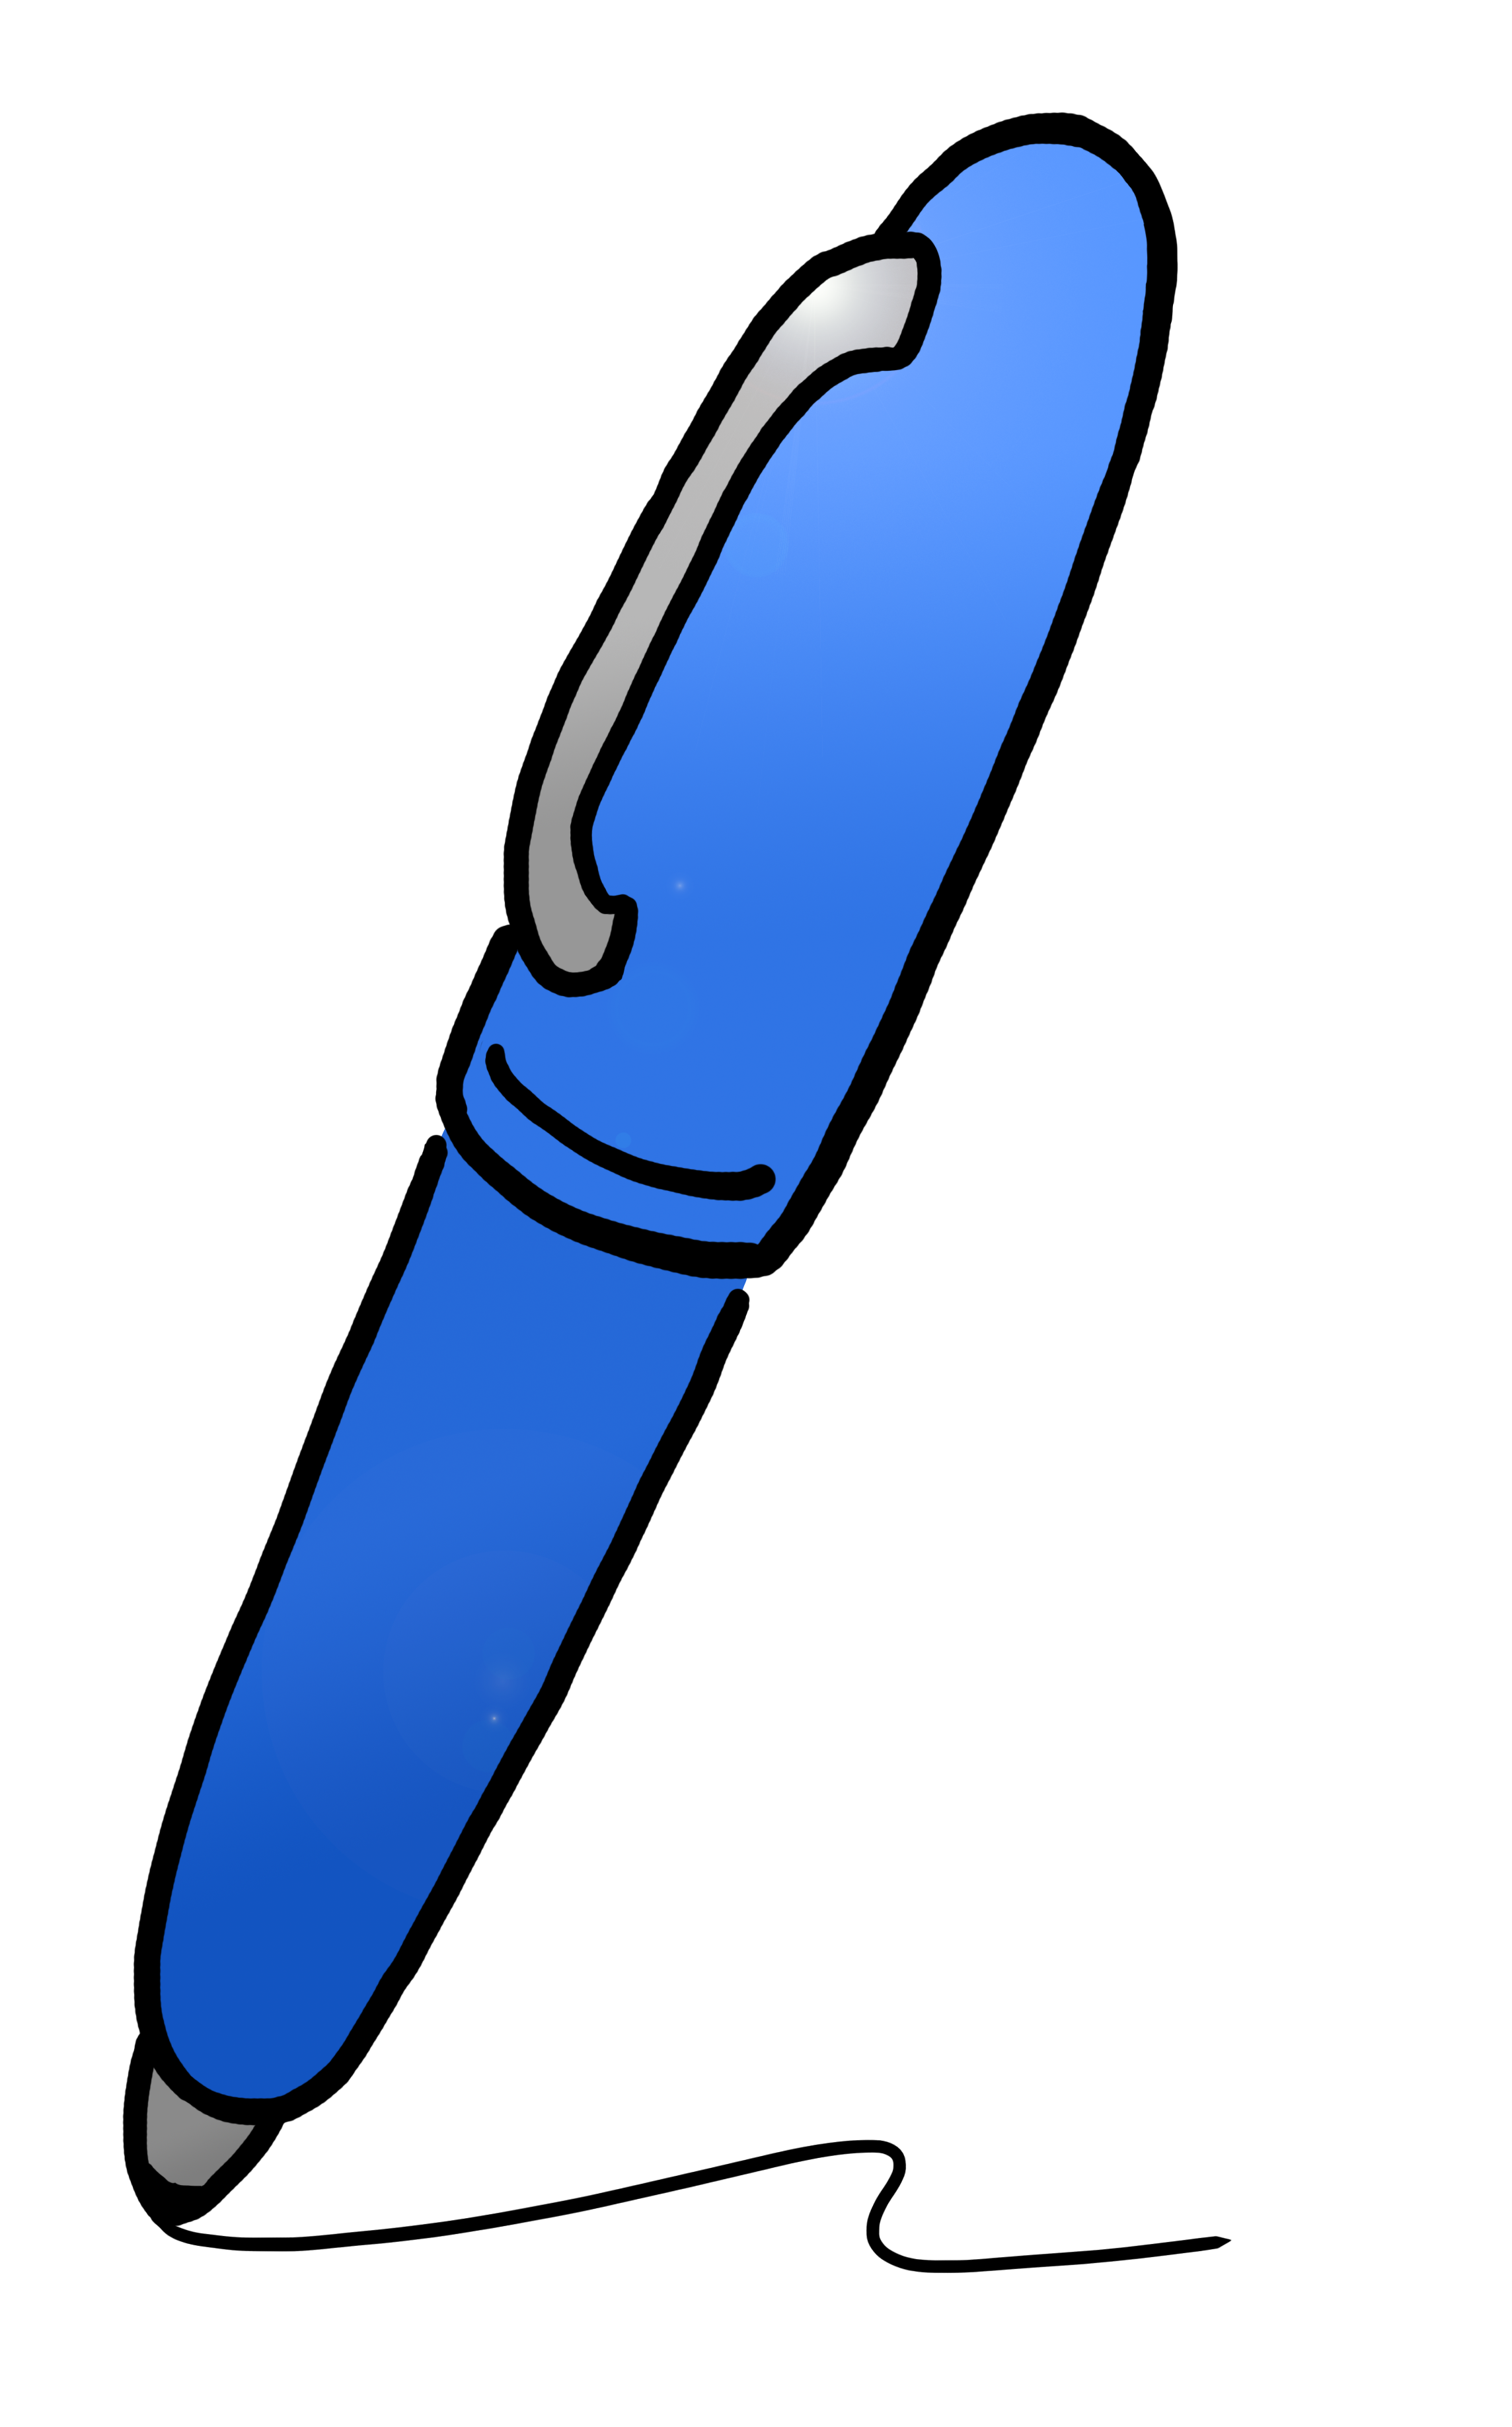 Pen Clipart to Download - dbclipart.com